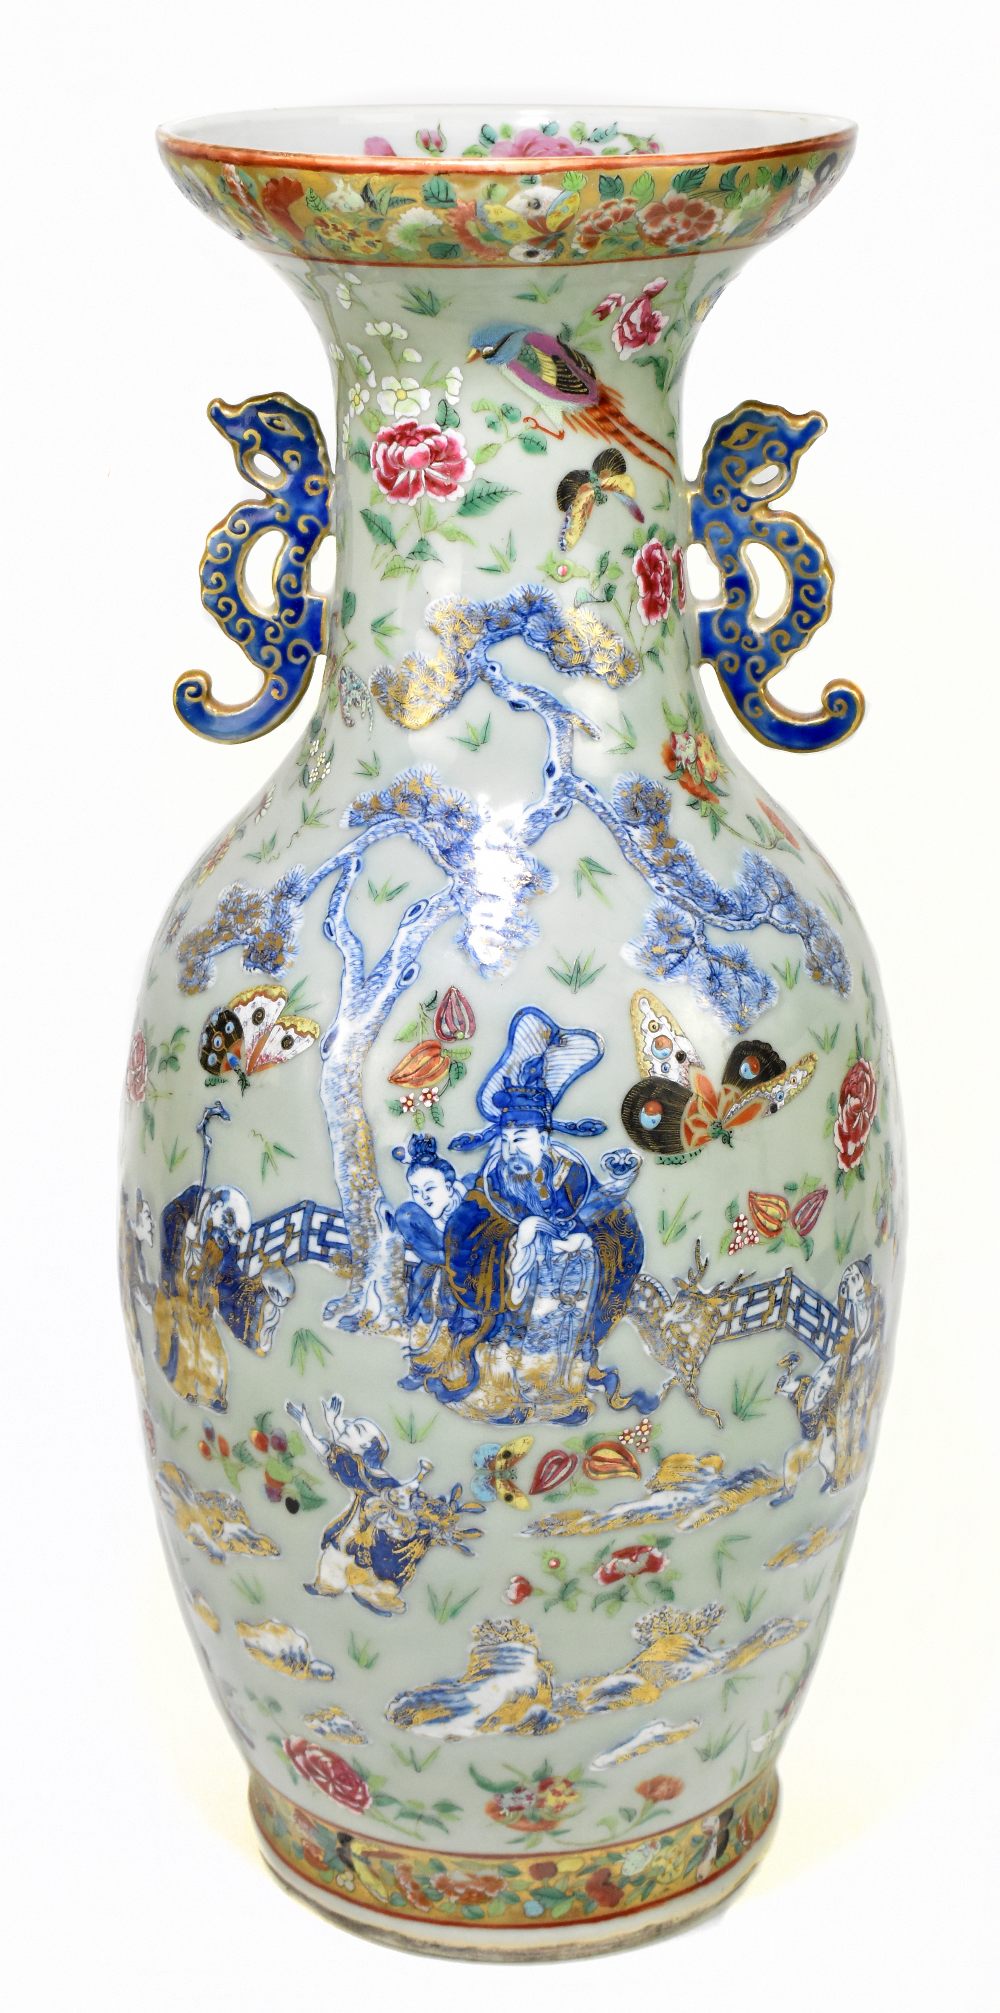 A large Chinese 19th century Canton Famille Rose enamel painted baluster vase with twin pierced